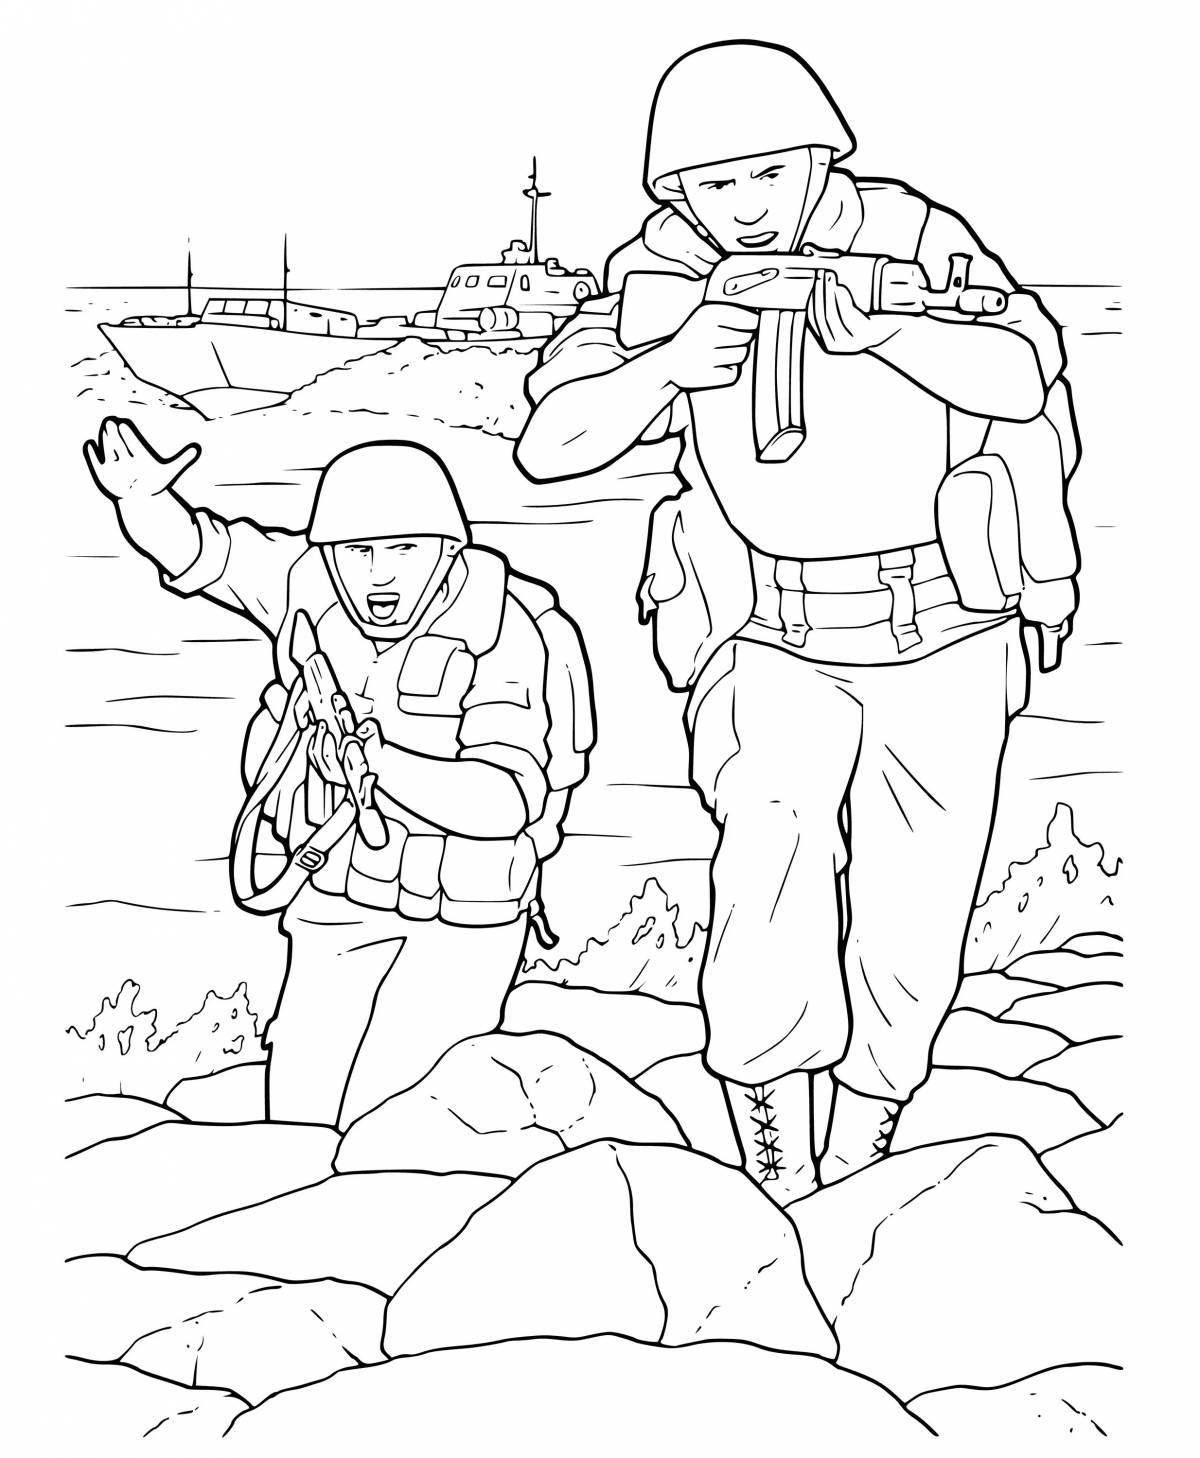 Colorful Russian soldier coloring book for kids